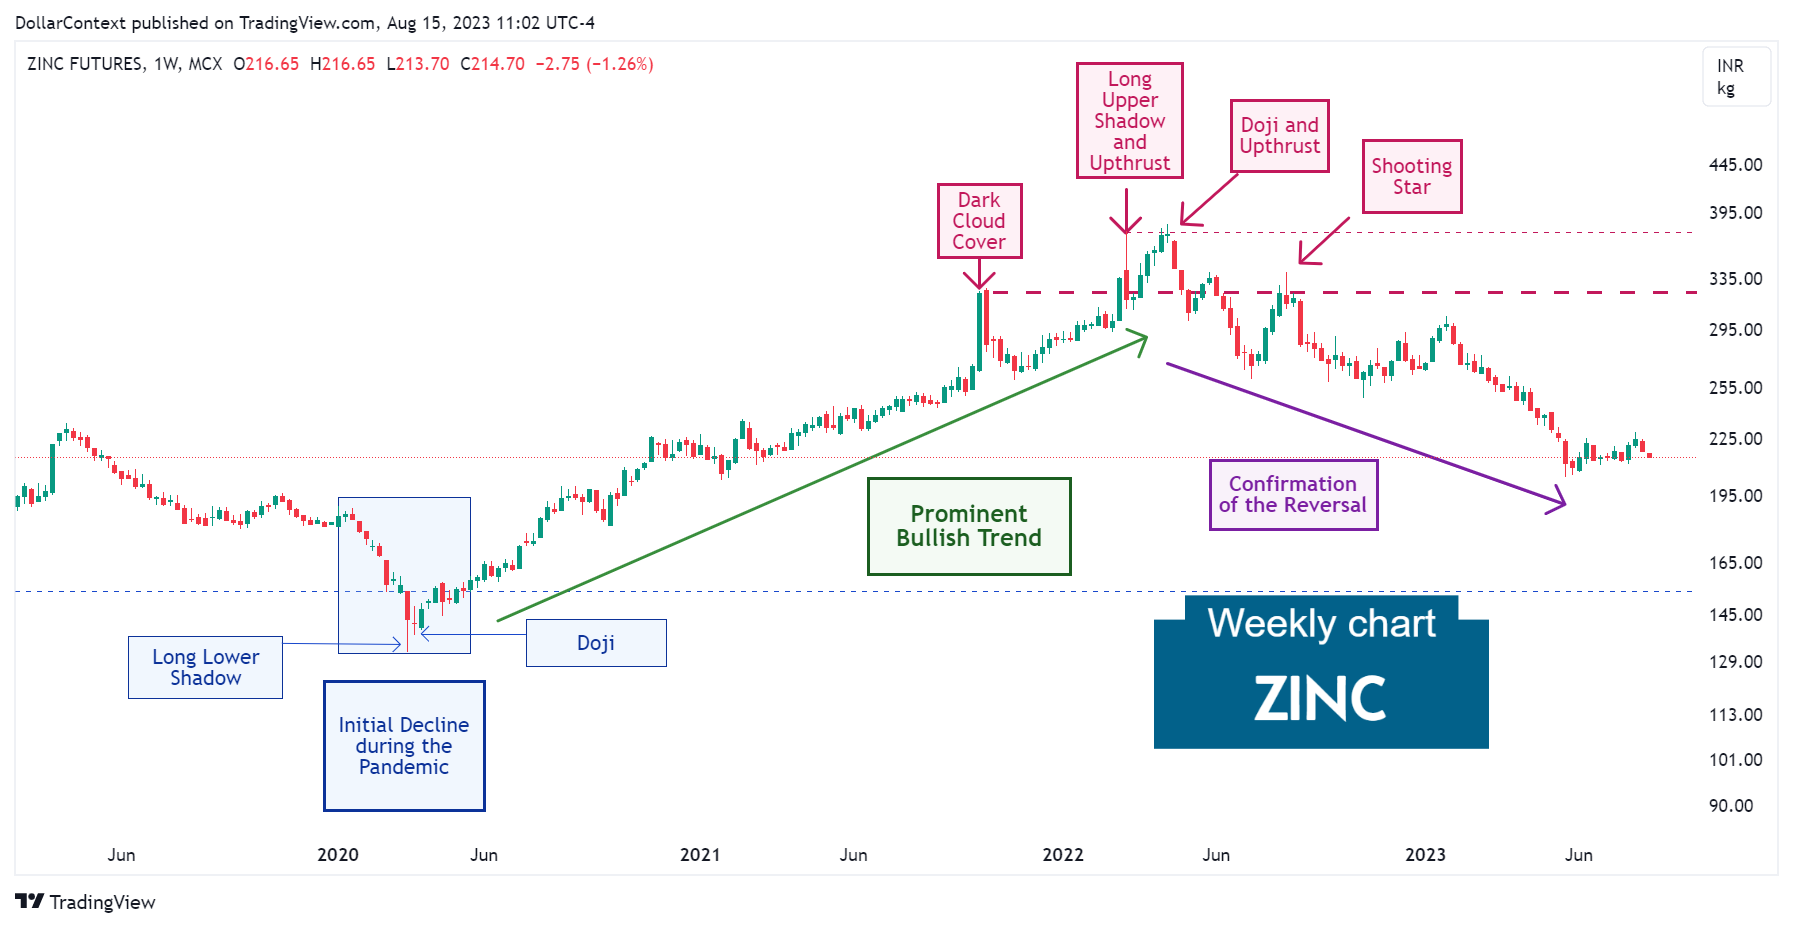 Zinc Futures: Downtrend After the Top